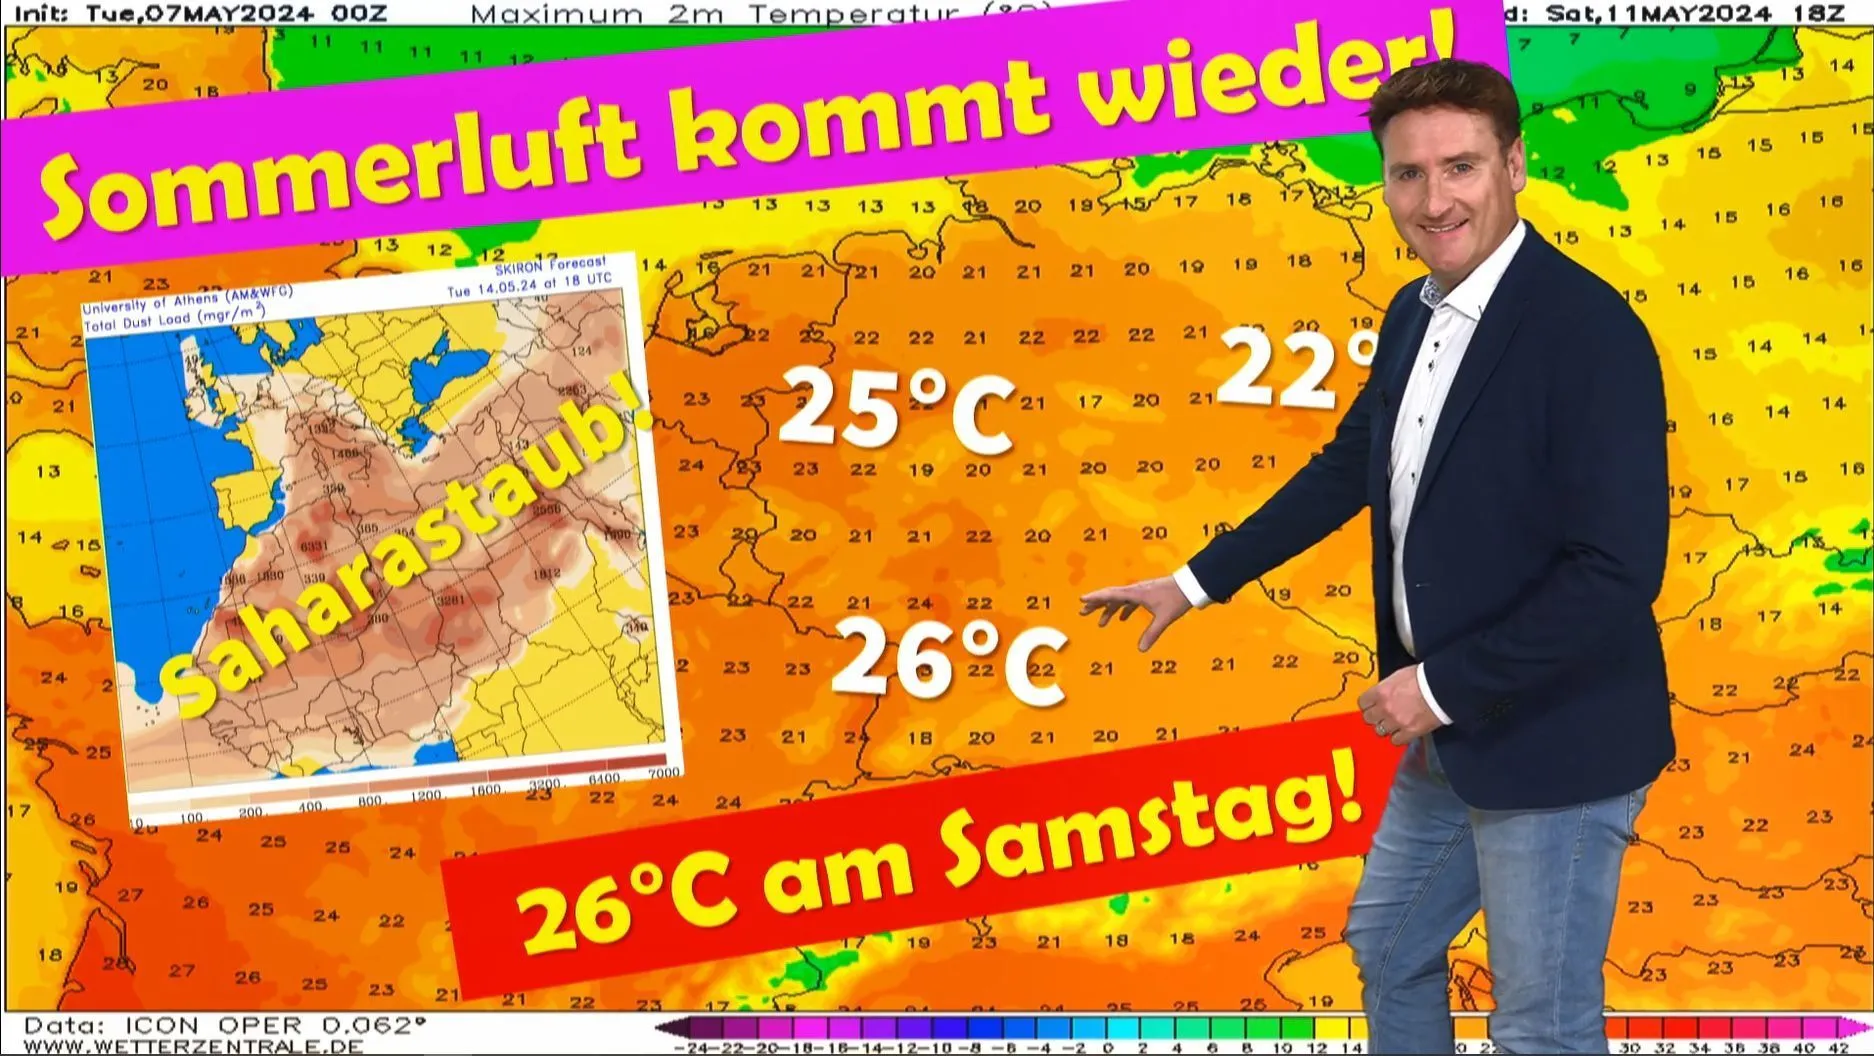 Weather expert Dominik Jung promises spring weather on Ascension Day, after which it will be even warmer! Up to 26°C next weekend.